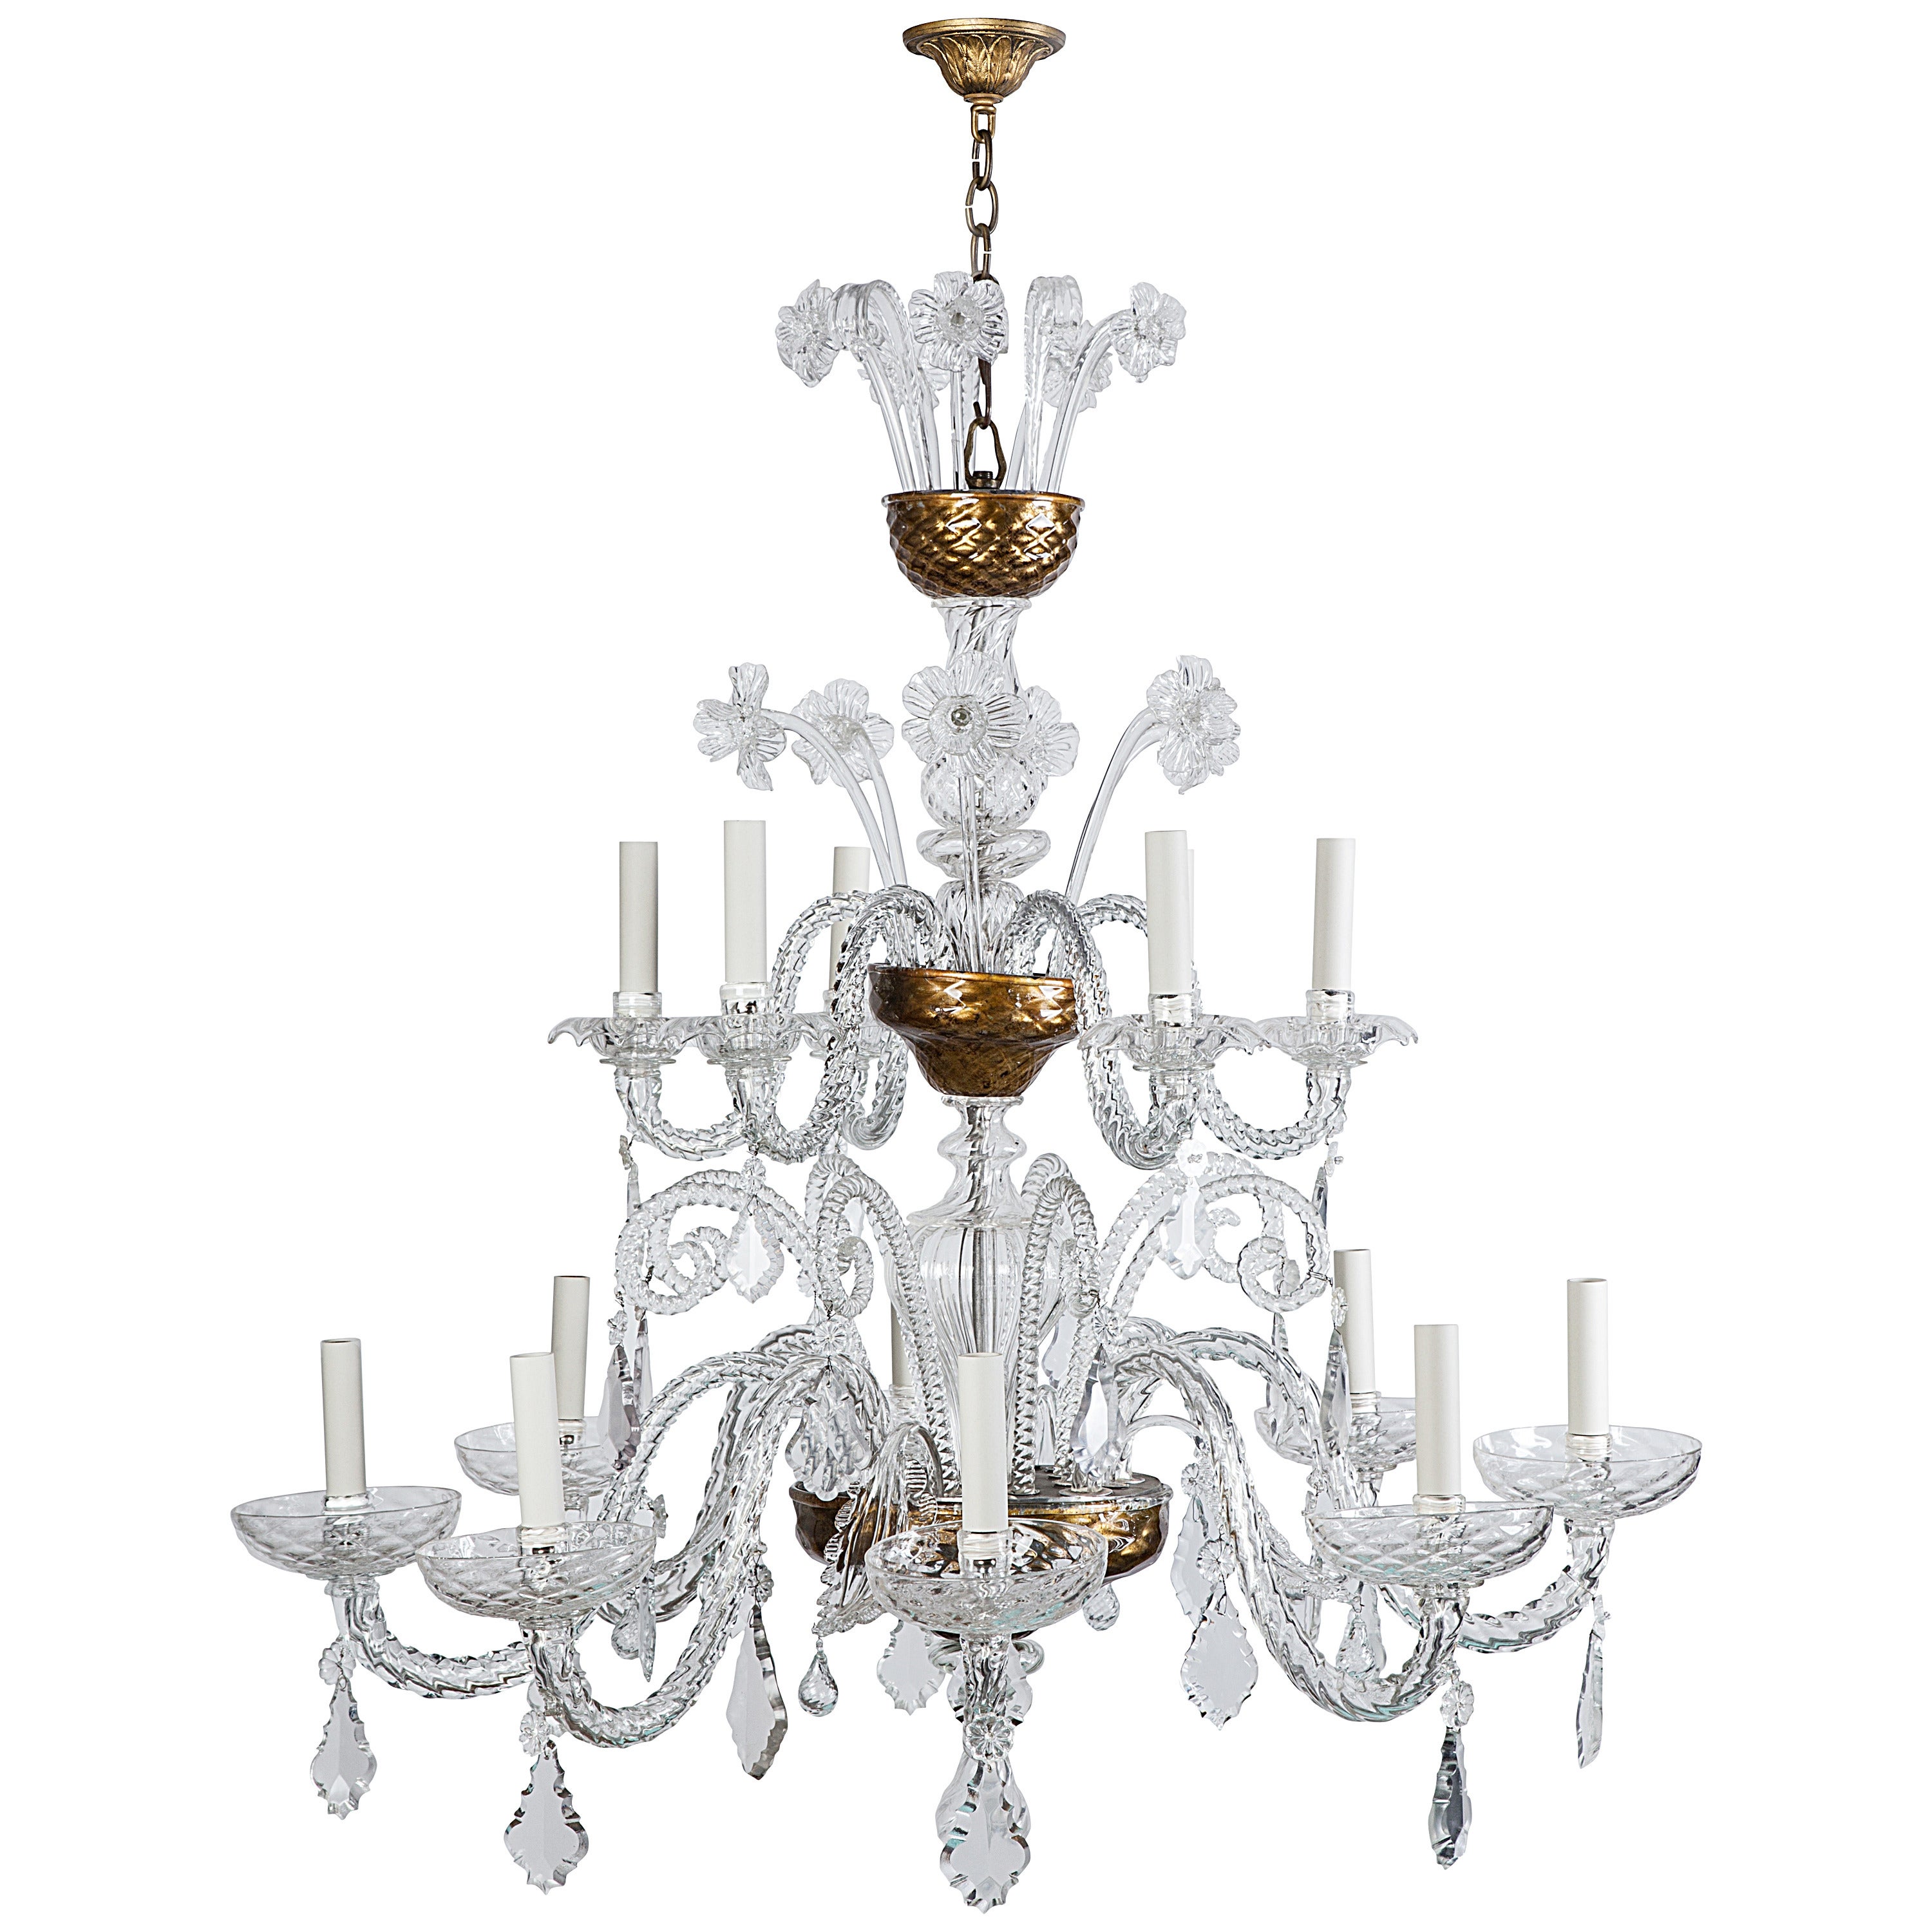 Murano Blown Glass Chandelier with Crystal Prisms